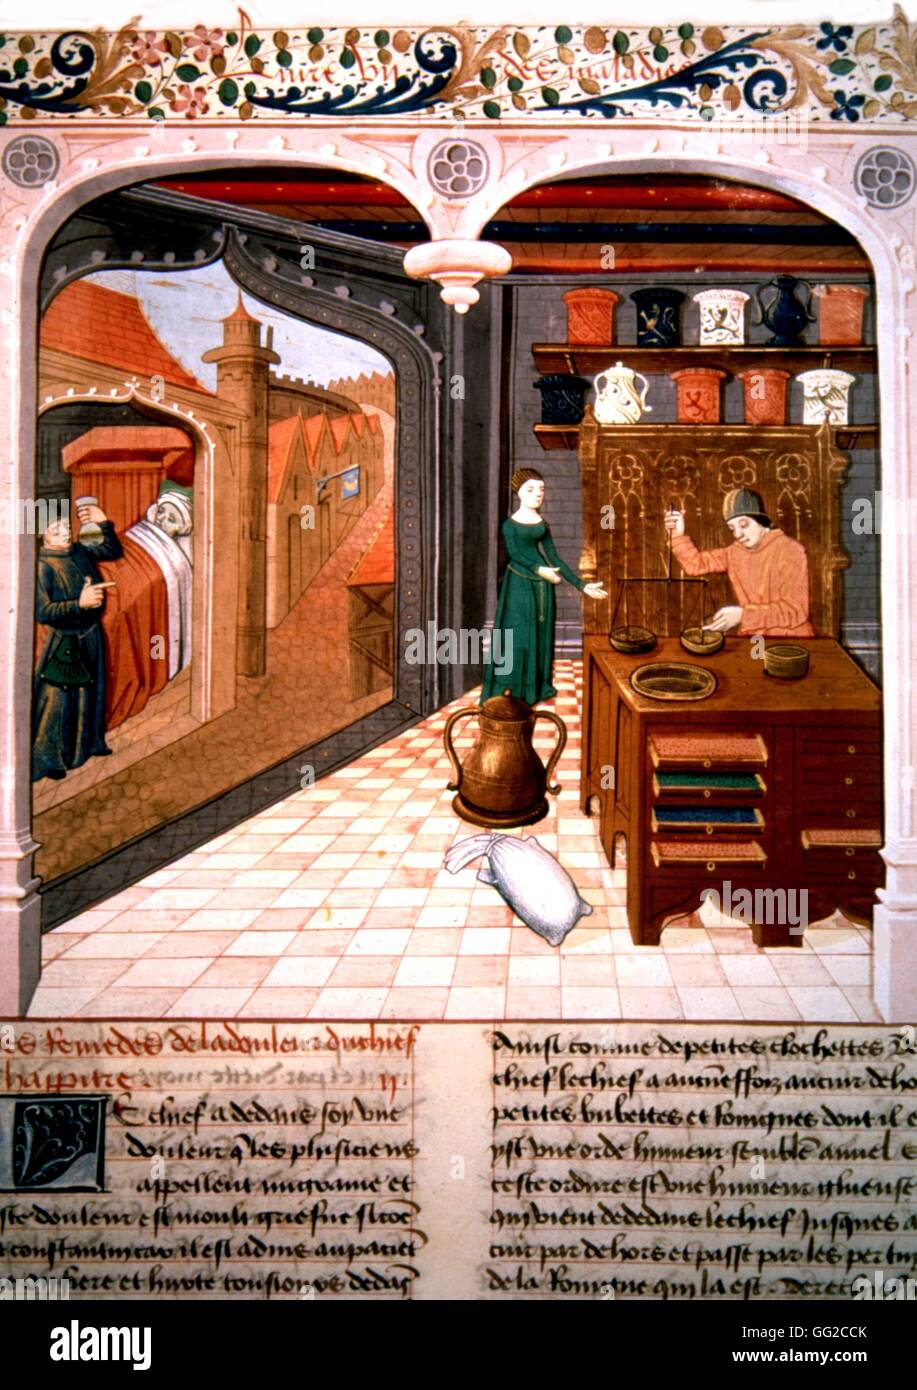 Barthelemy the English, 'The Book of property of things'. Examination of urines and apothicary, on the r. 15th century Miniature Paris. Bibliothèque de la Sorbonne Stock Photo